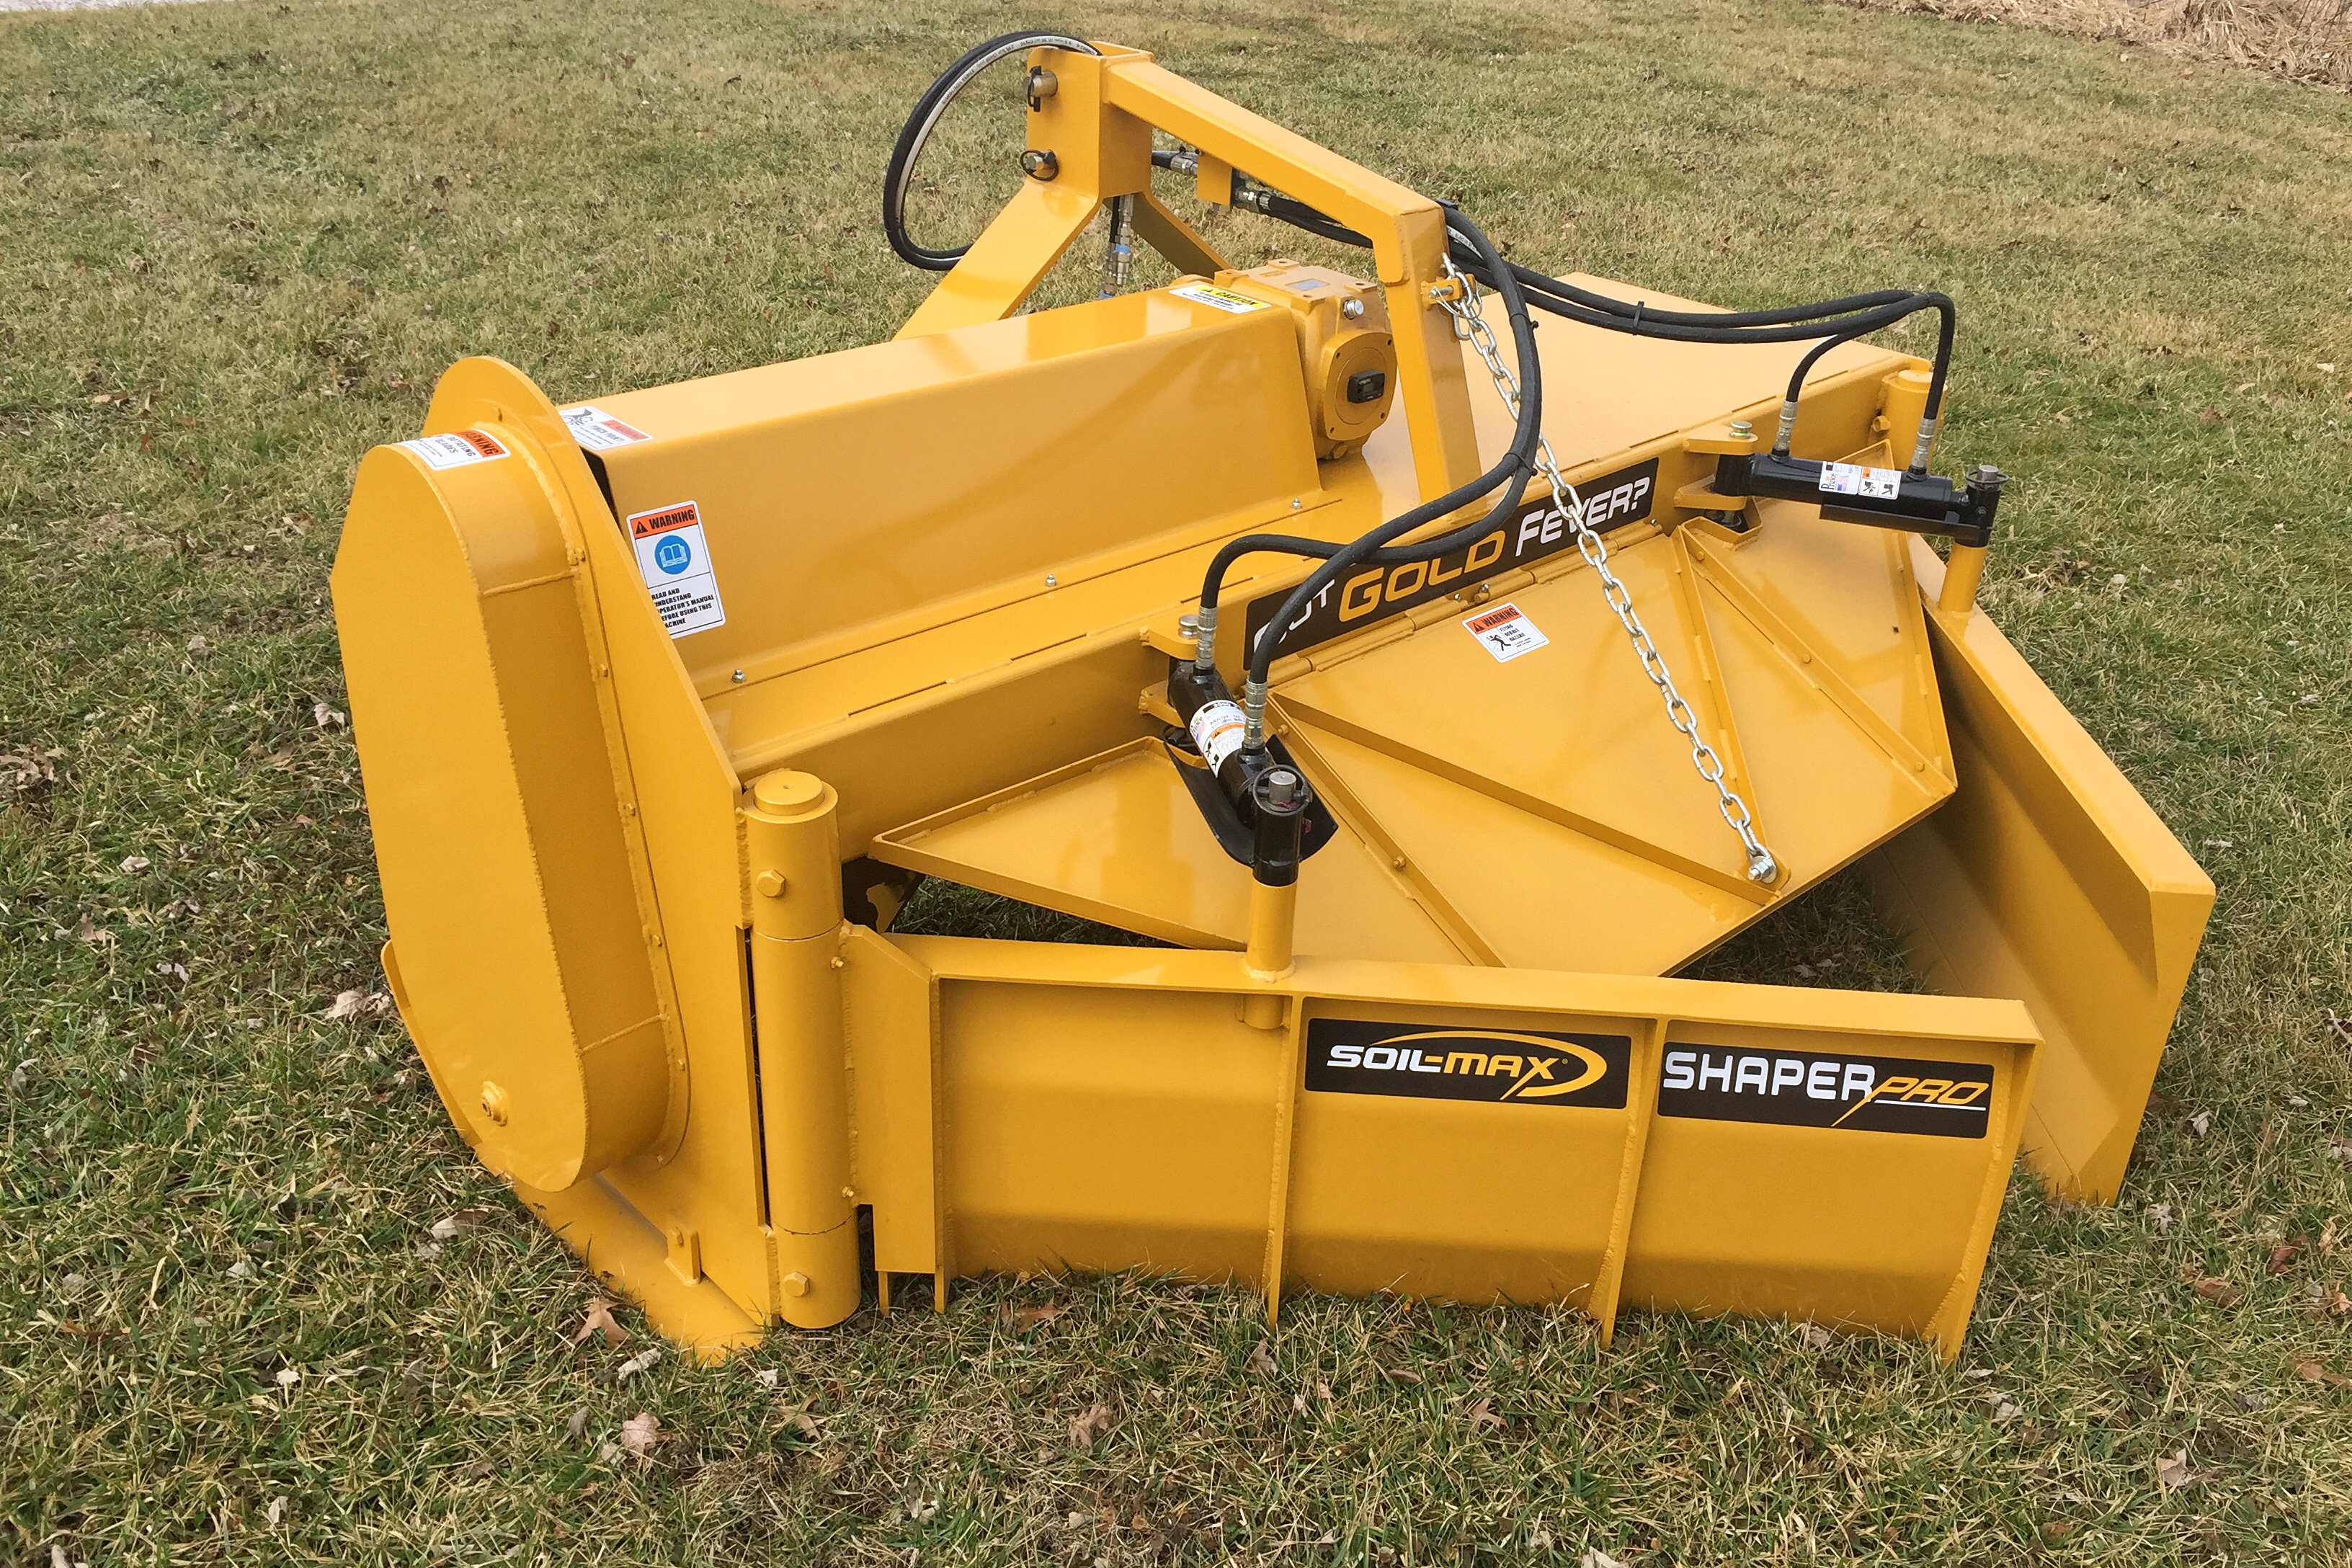 Youngblut AG Soil Max Shaper Pro